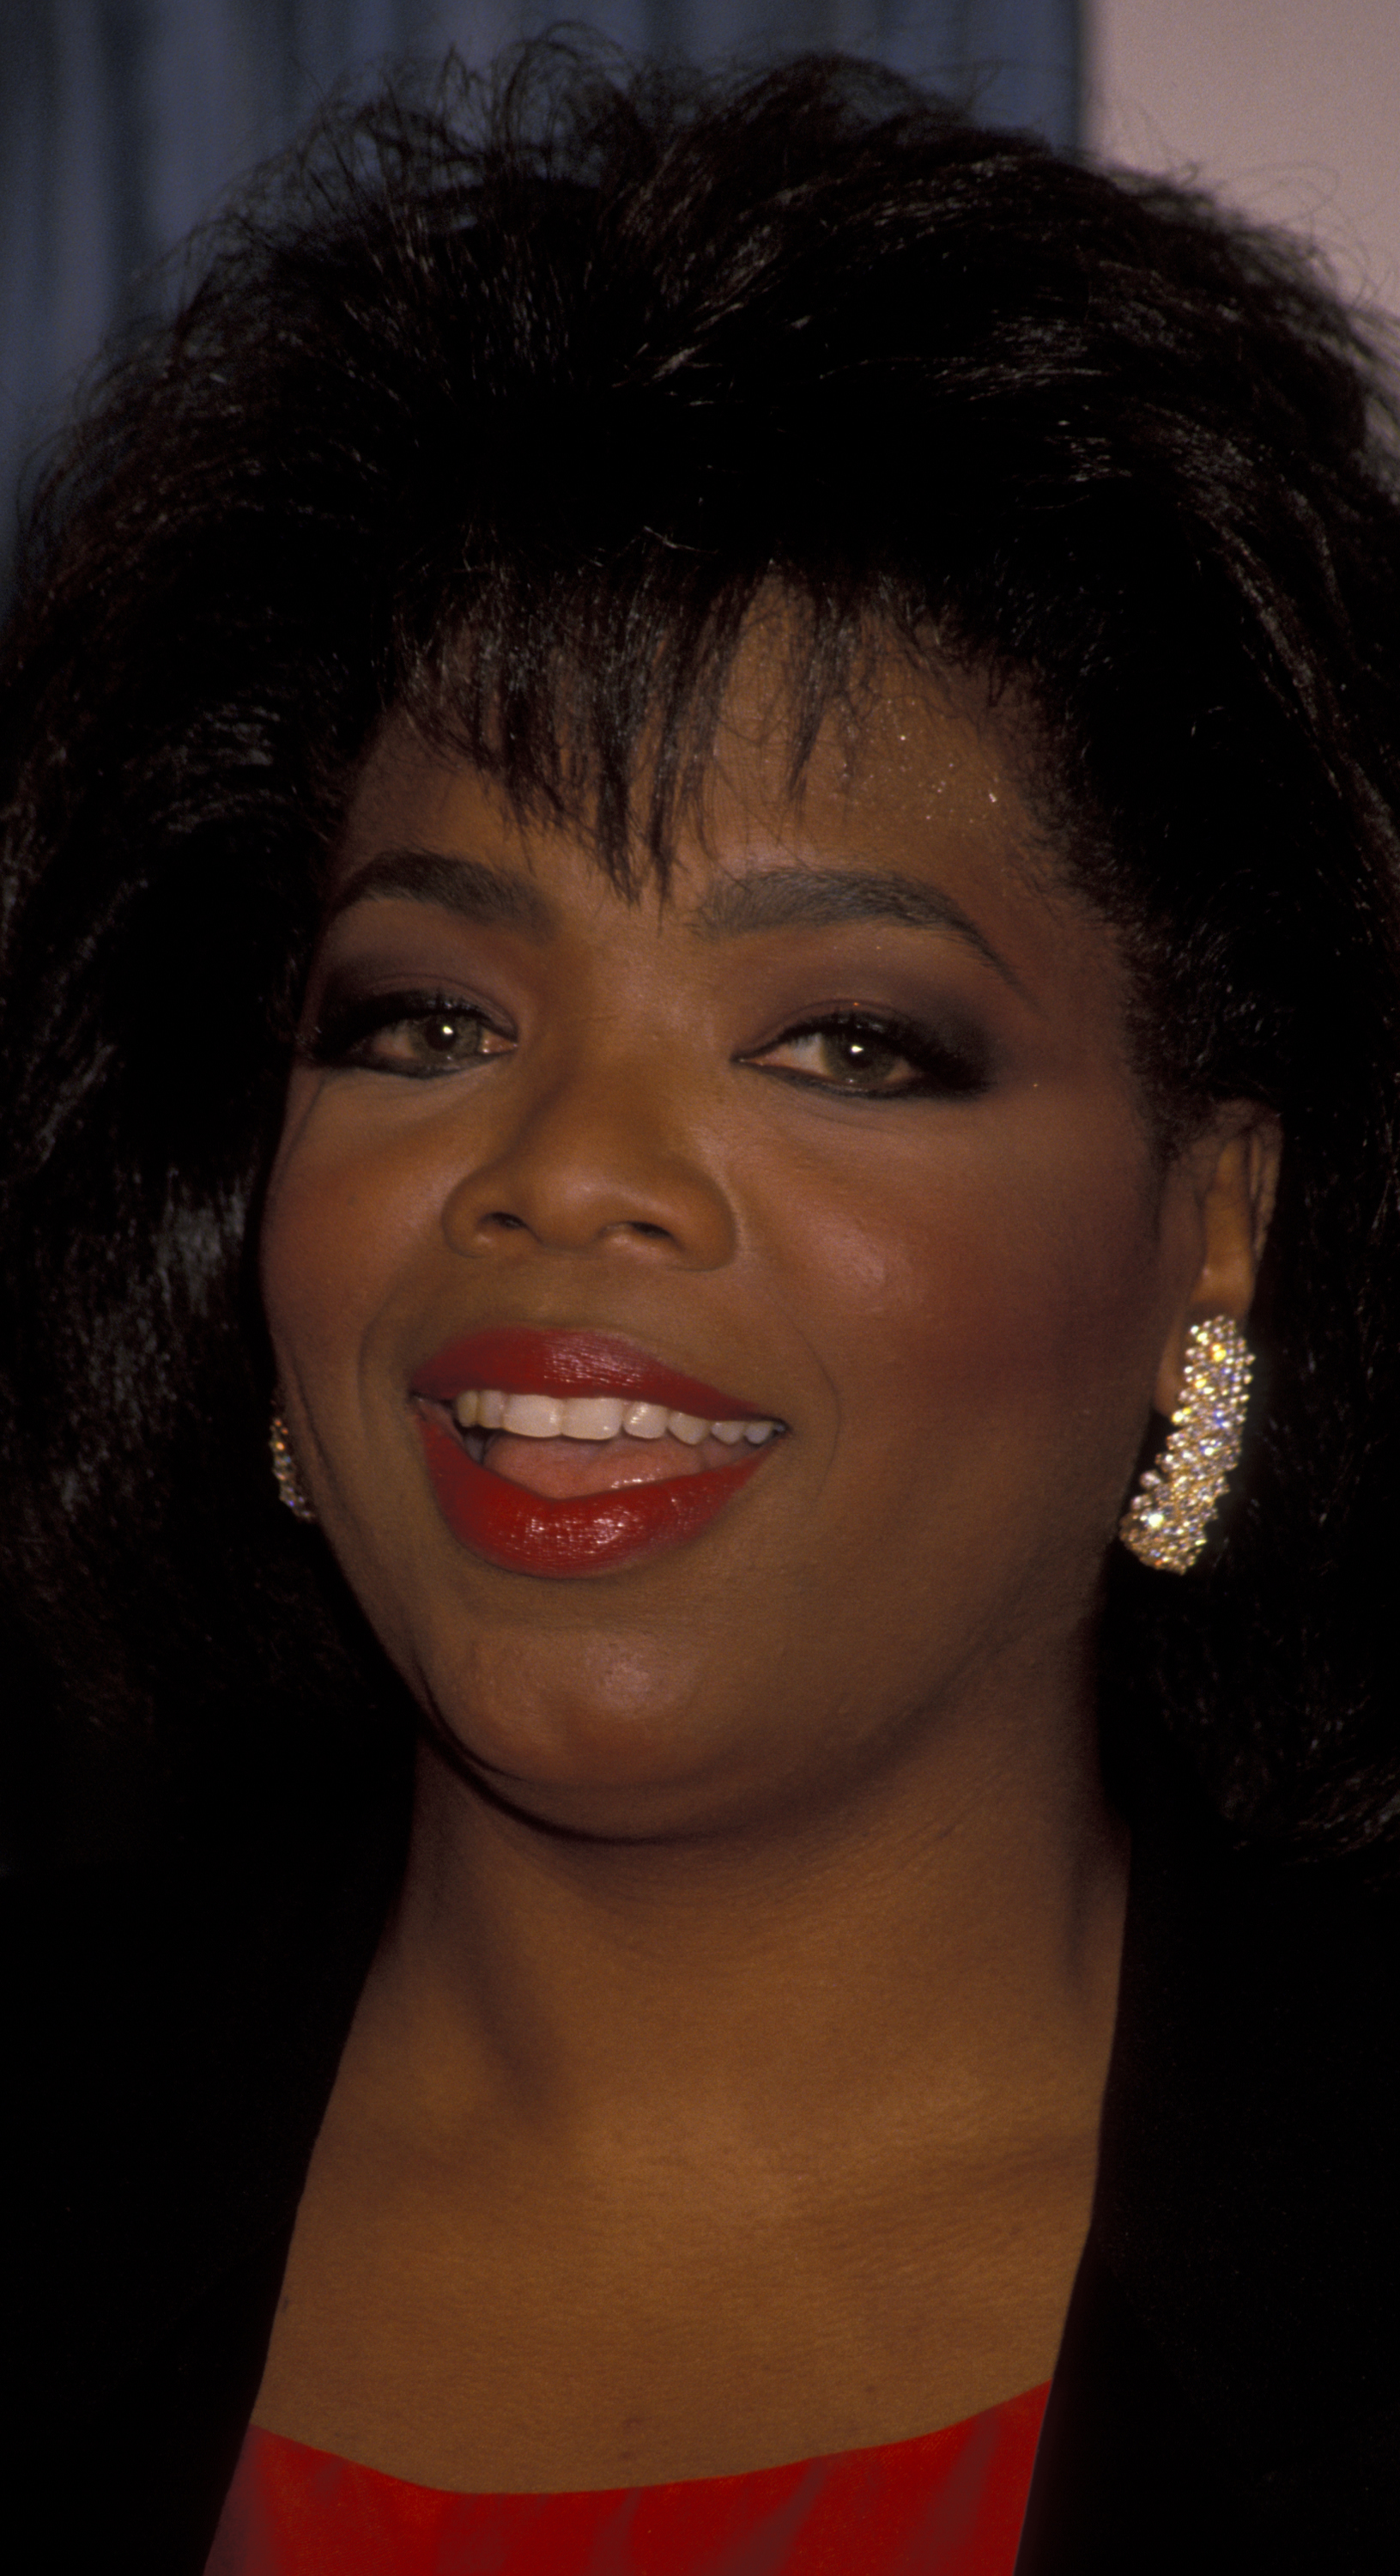 Oprah Winfrey attends the American Teacher Awards Gala at the Pantages Theater on October 7, 1990 in Hollywood, California. | Source: Getty Images